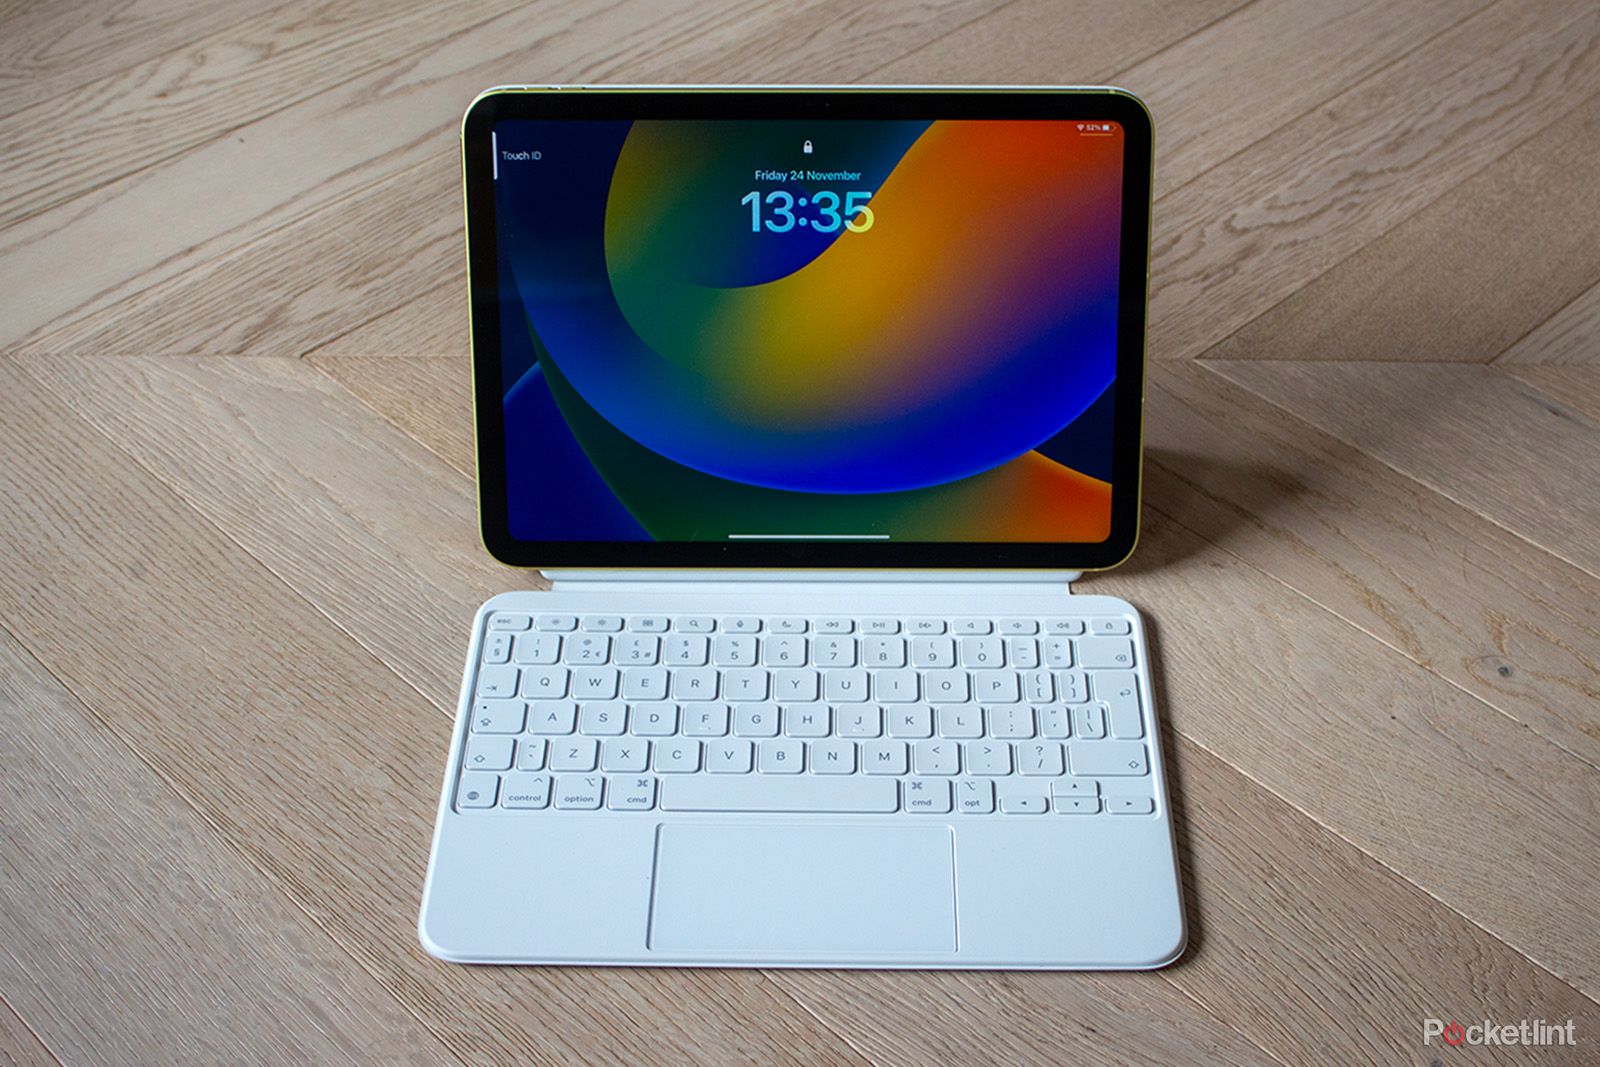 I've been using the Apple Magic Keyboard Folio and this is the